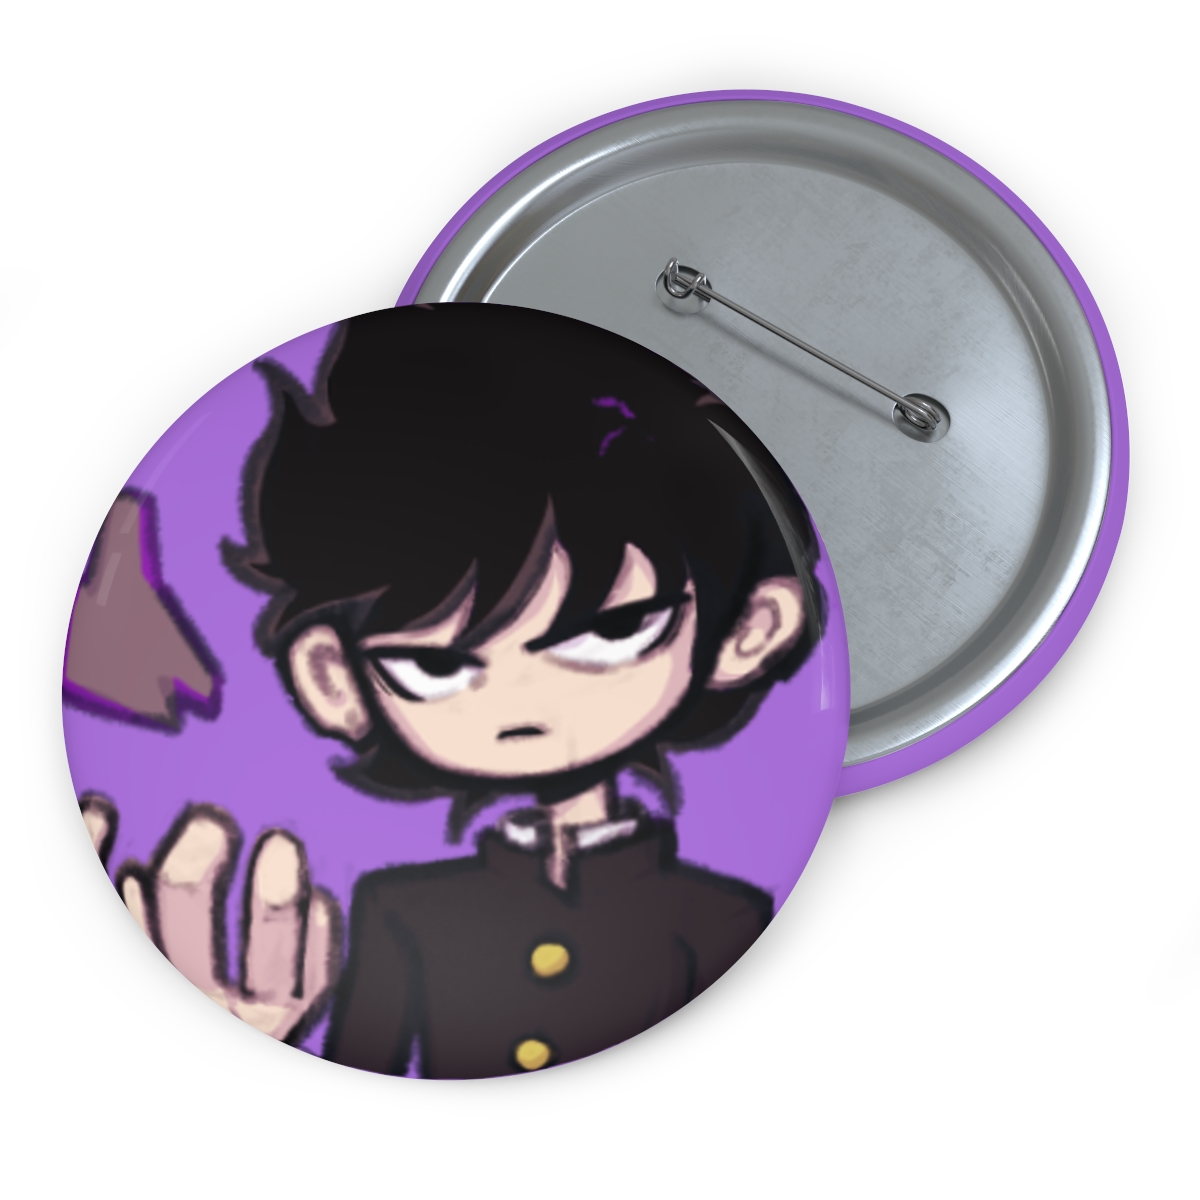 100 Mob Pin Buttons product thumbnail image